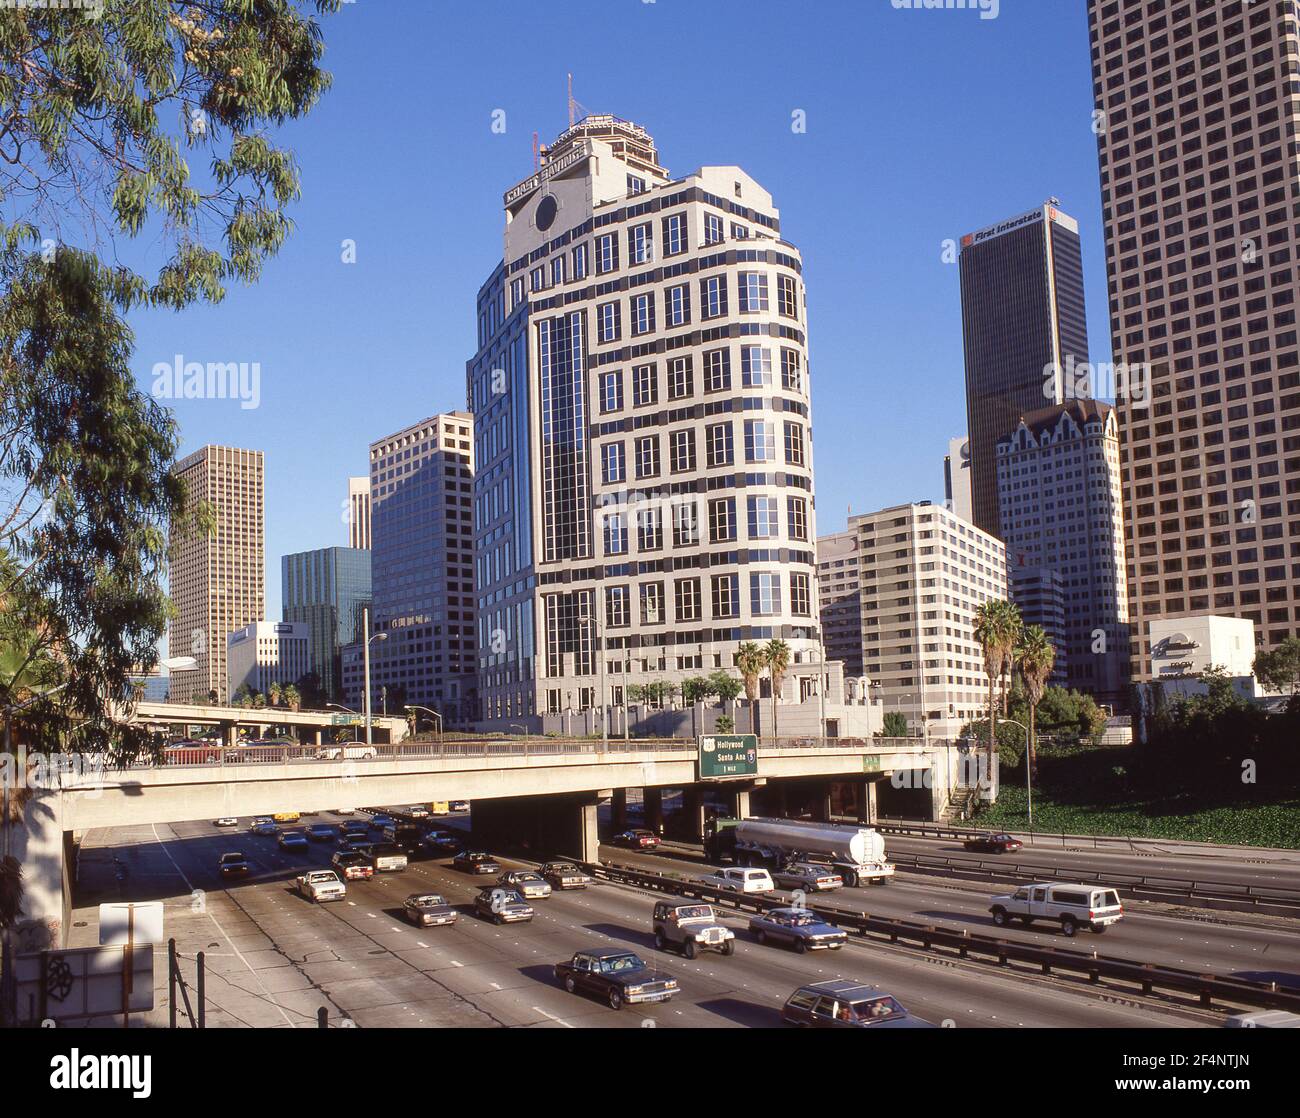 Freeway in downtown district, Los Angeles, California, United States of America Stock Photo